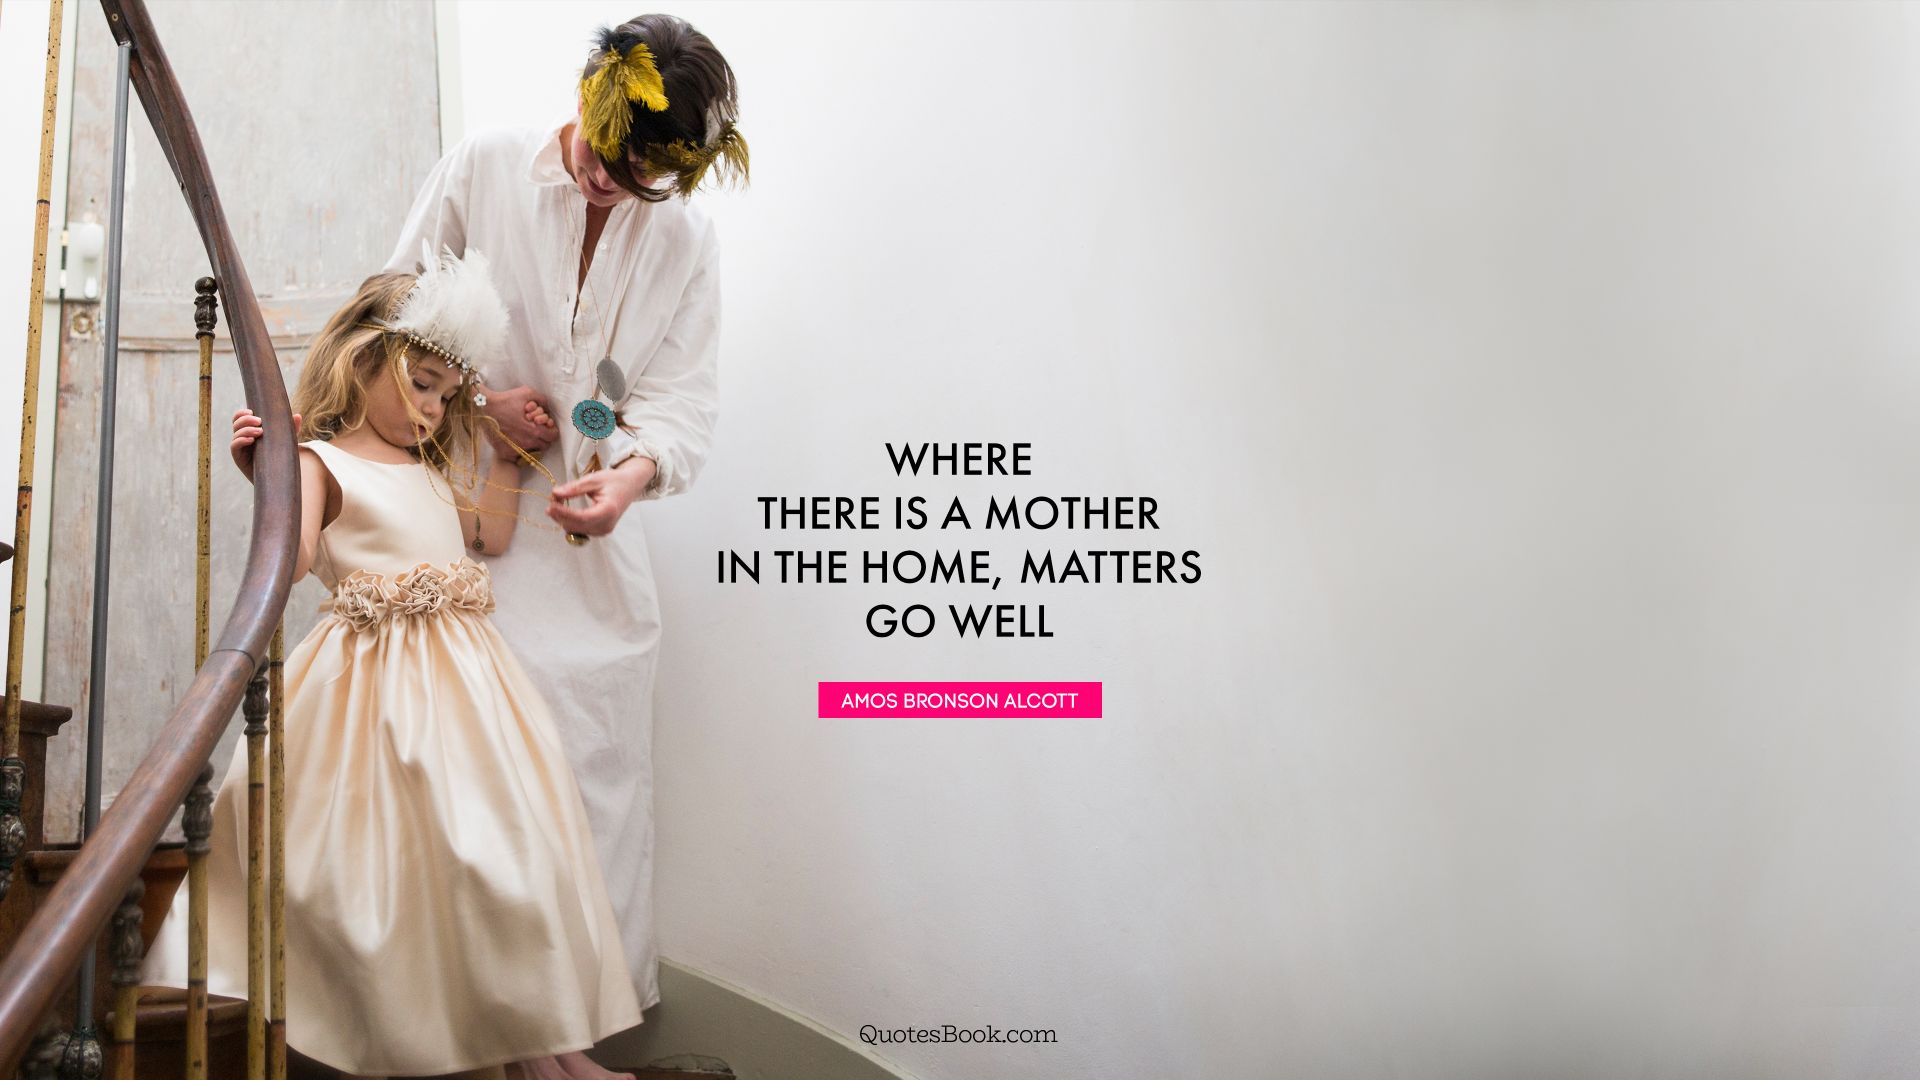 Where there is a mother in the home, matters go well. - Quote by Amos Bronson Alcott